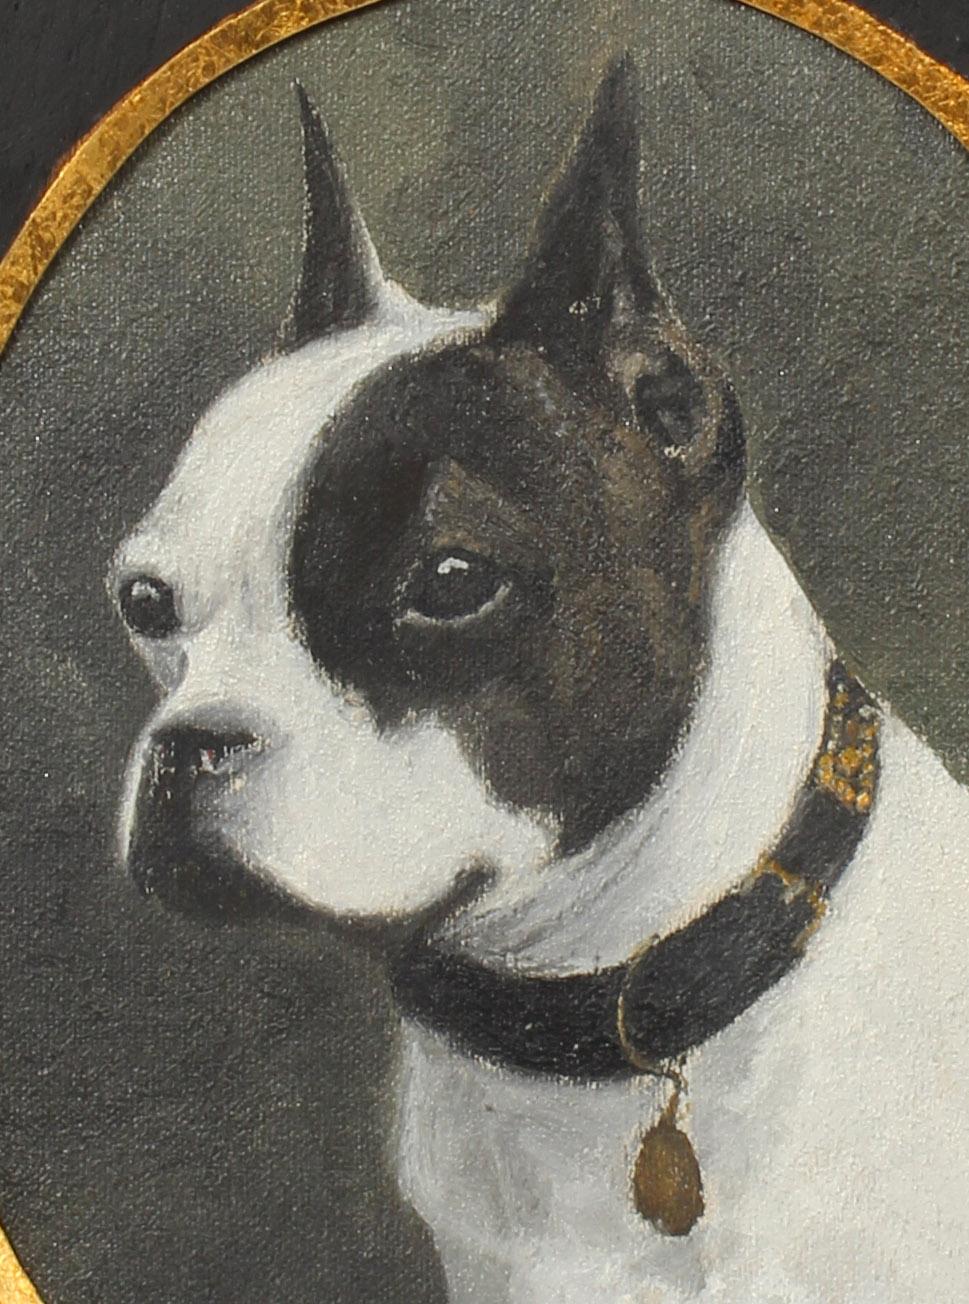 Dog Portrait Boston Terrier Framed Antique Canadian Oil Painting Oval Frame 1910 - Black Animal Painting by Alfred William Campbell